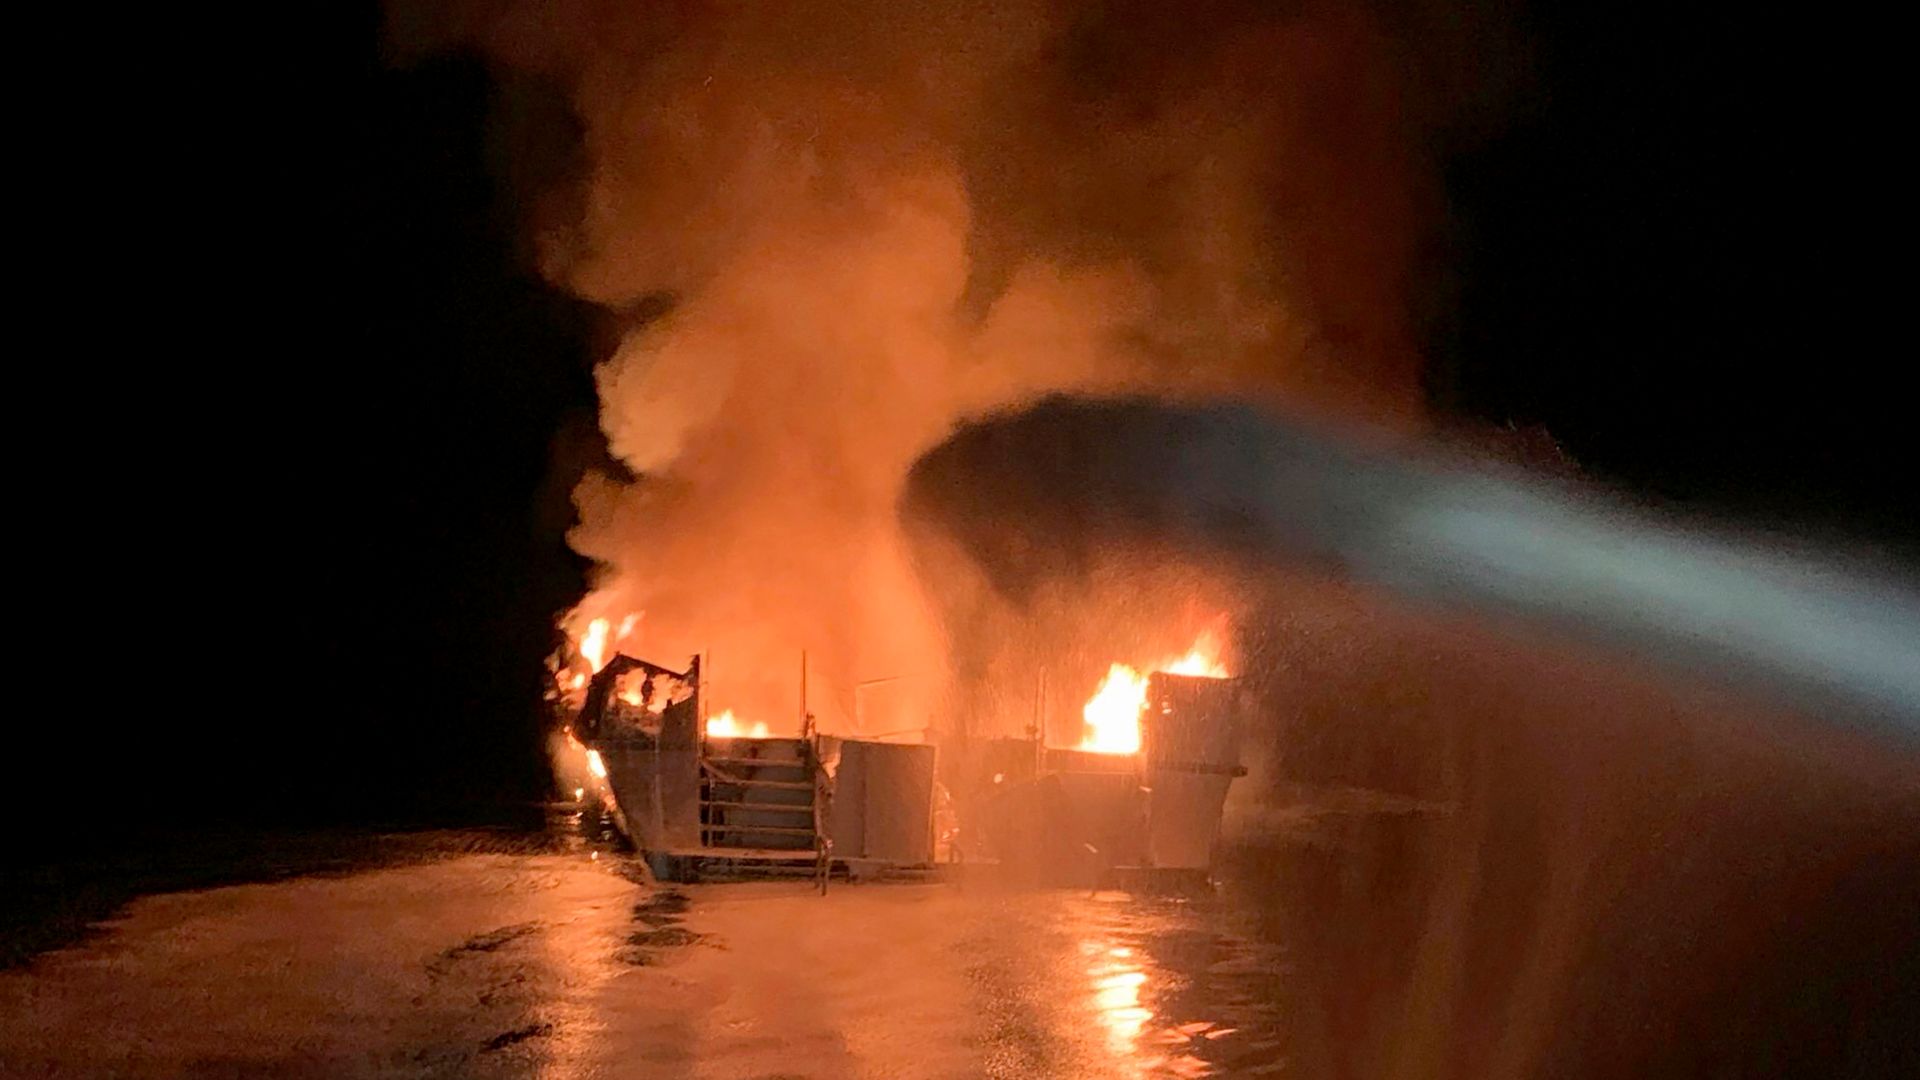 Boat captain jailed over fire that killed 34 people